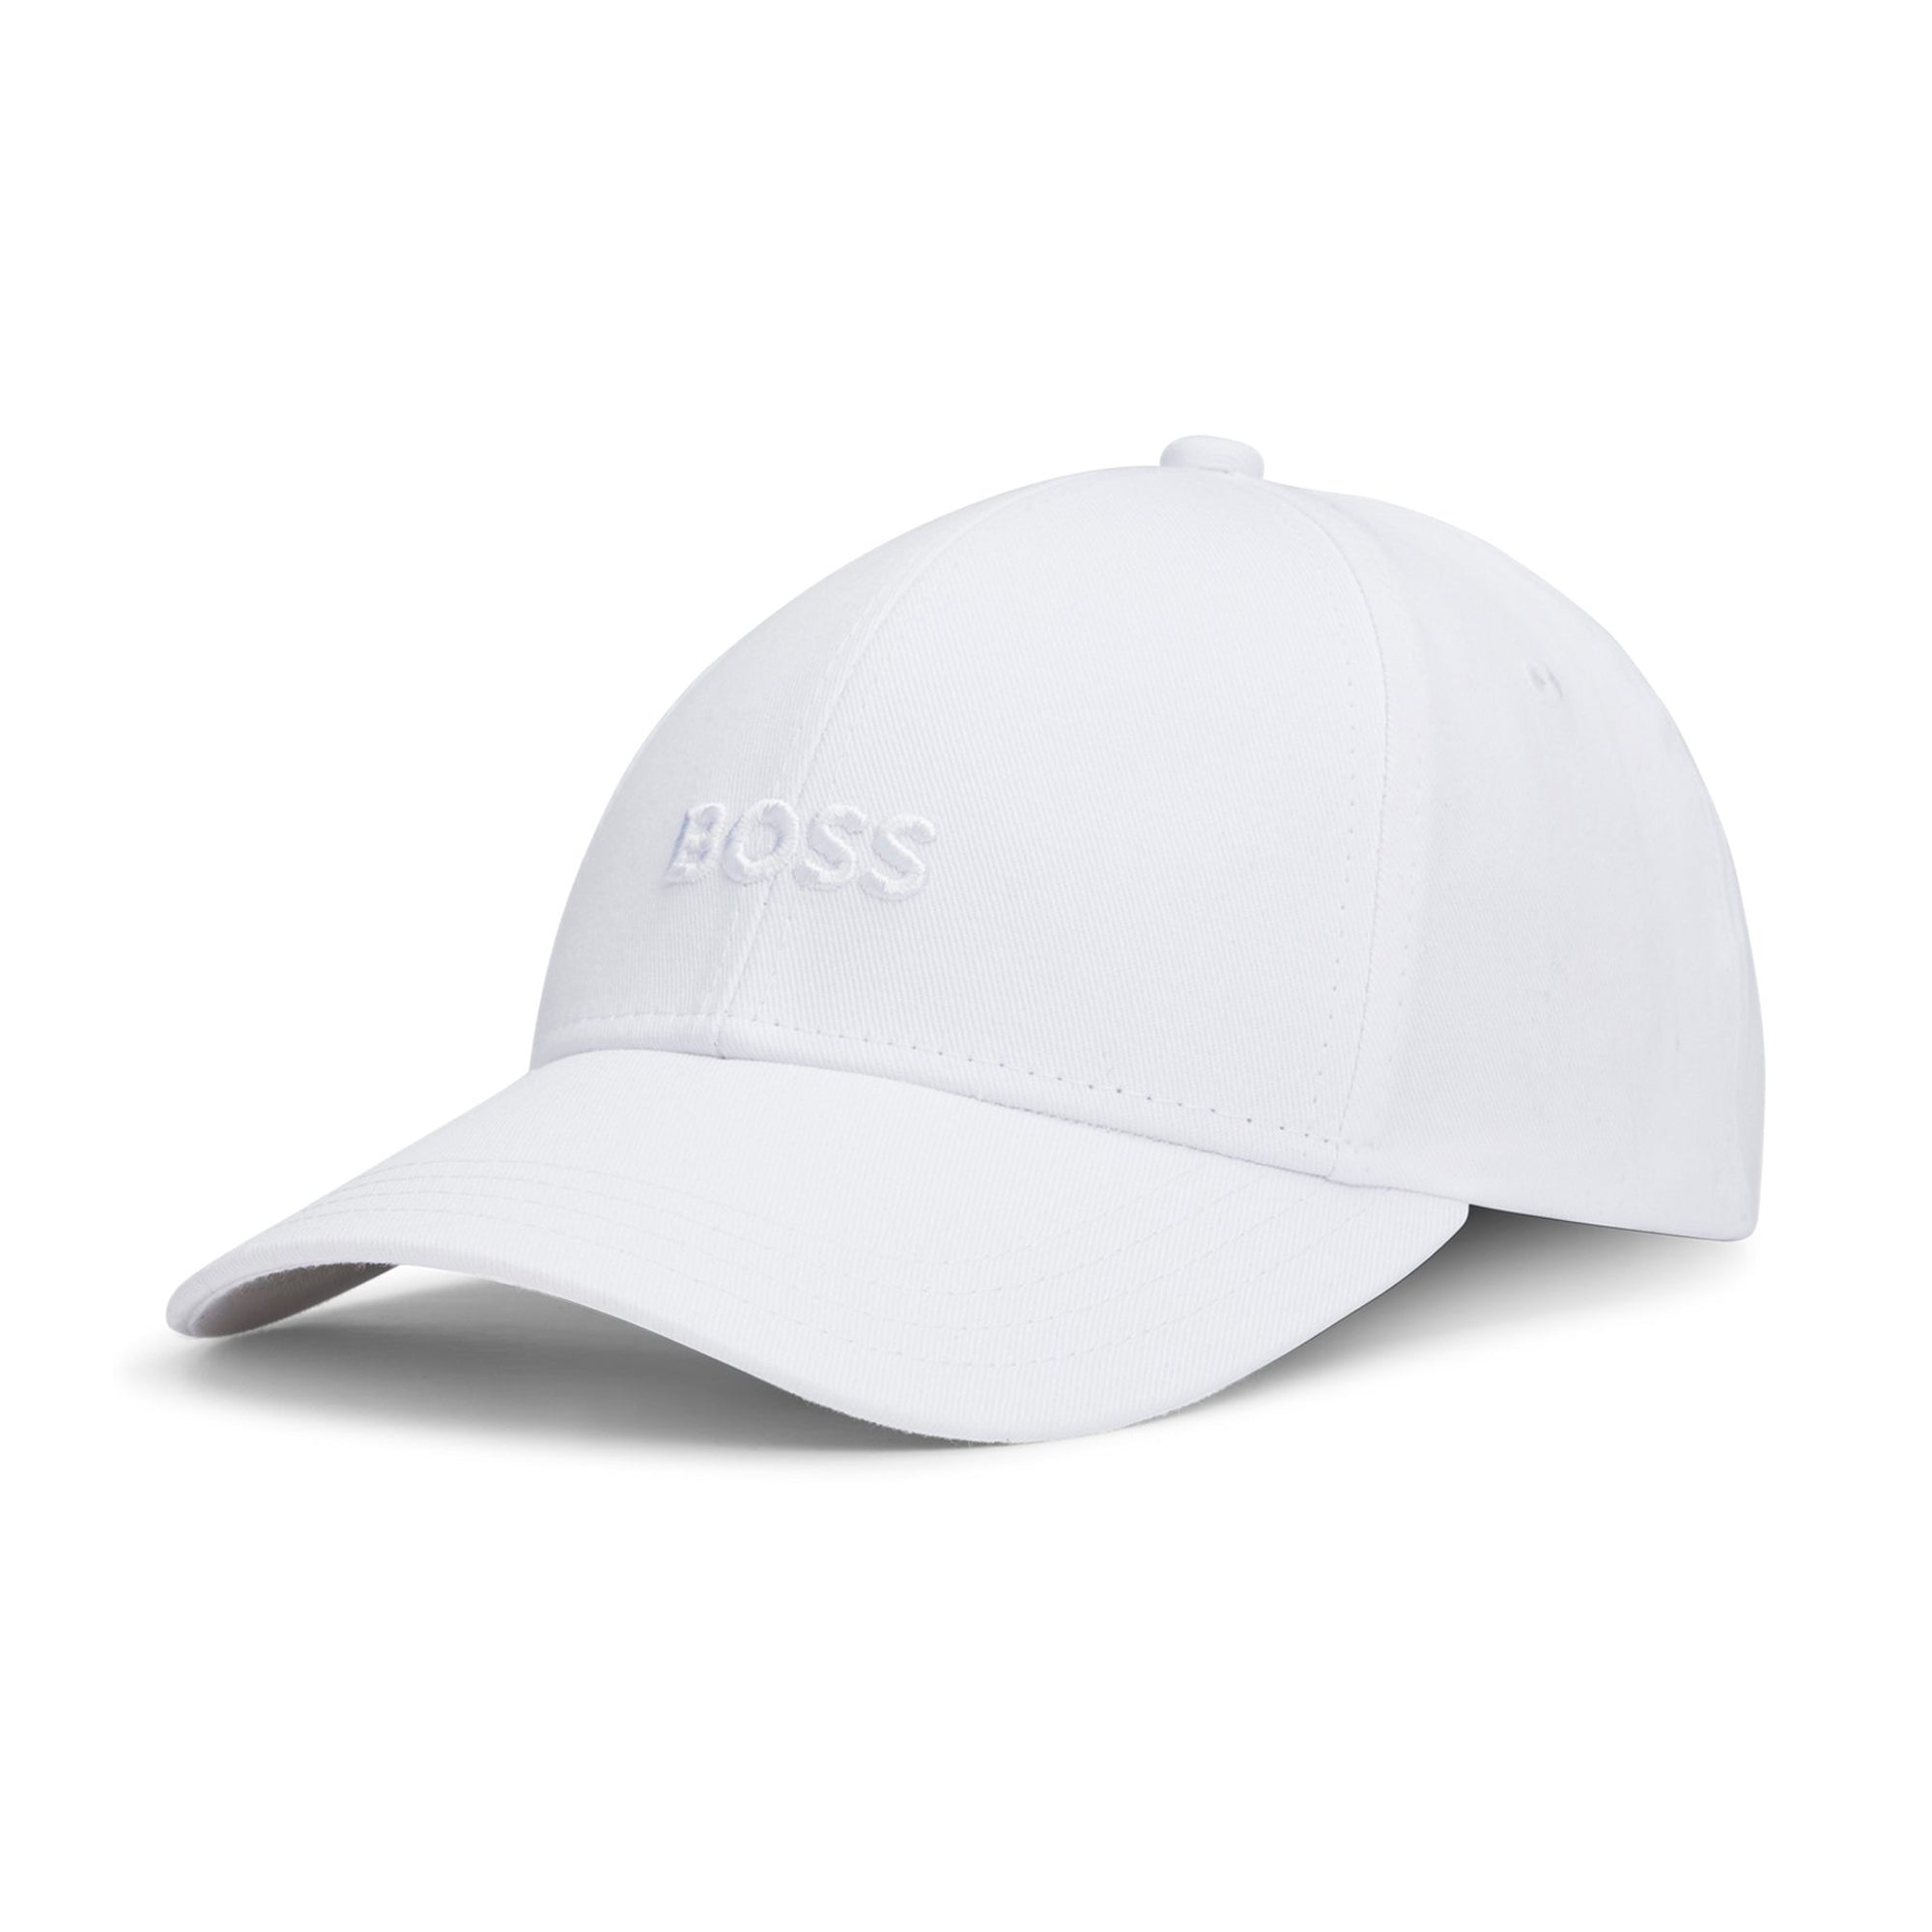 Boss Zed Embroidered Cotton - Beige Cap